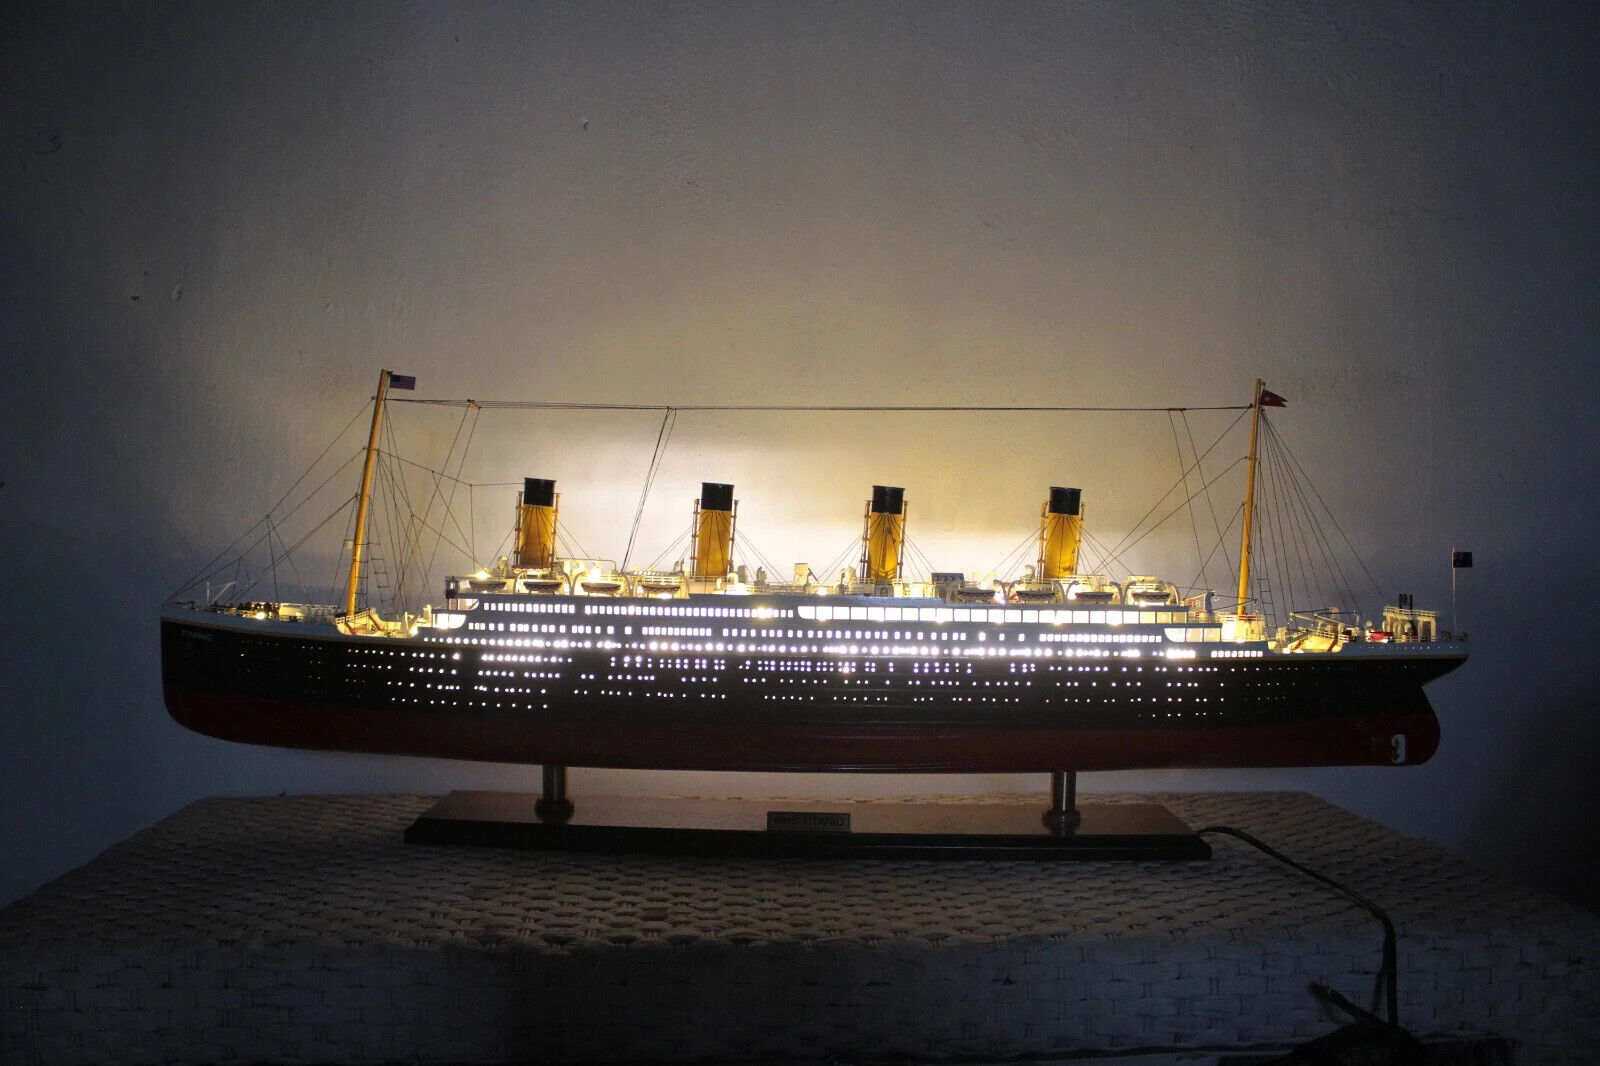 RMS Titanic Wooden Ship Model With Lights - RMS Titanic Model Ship